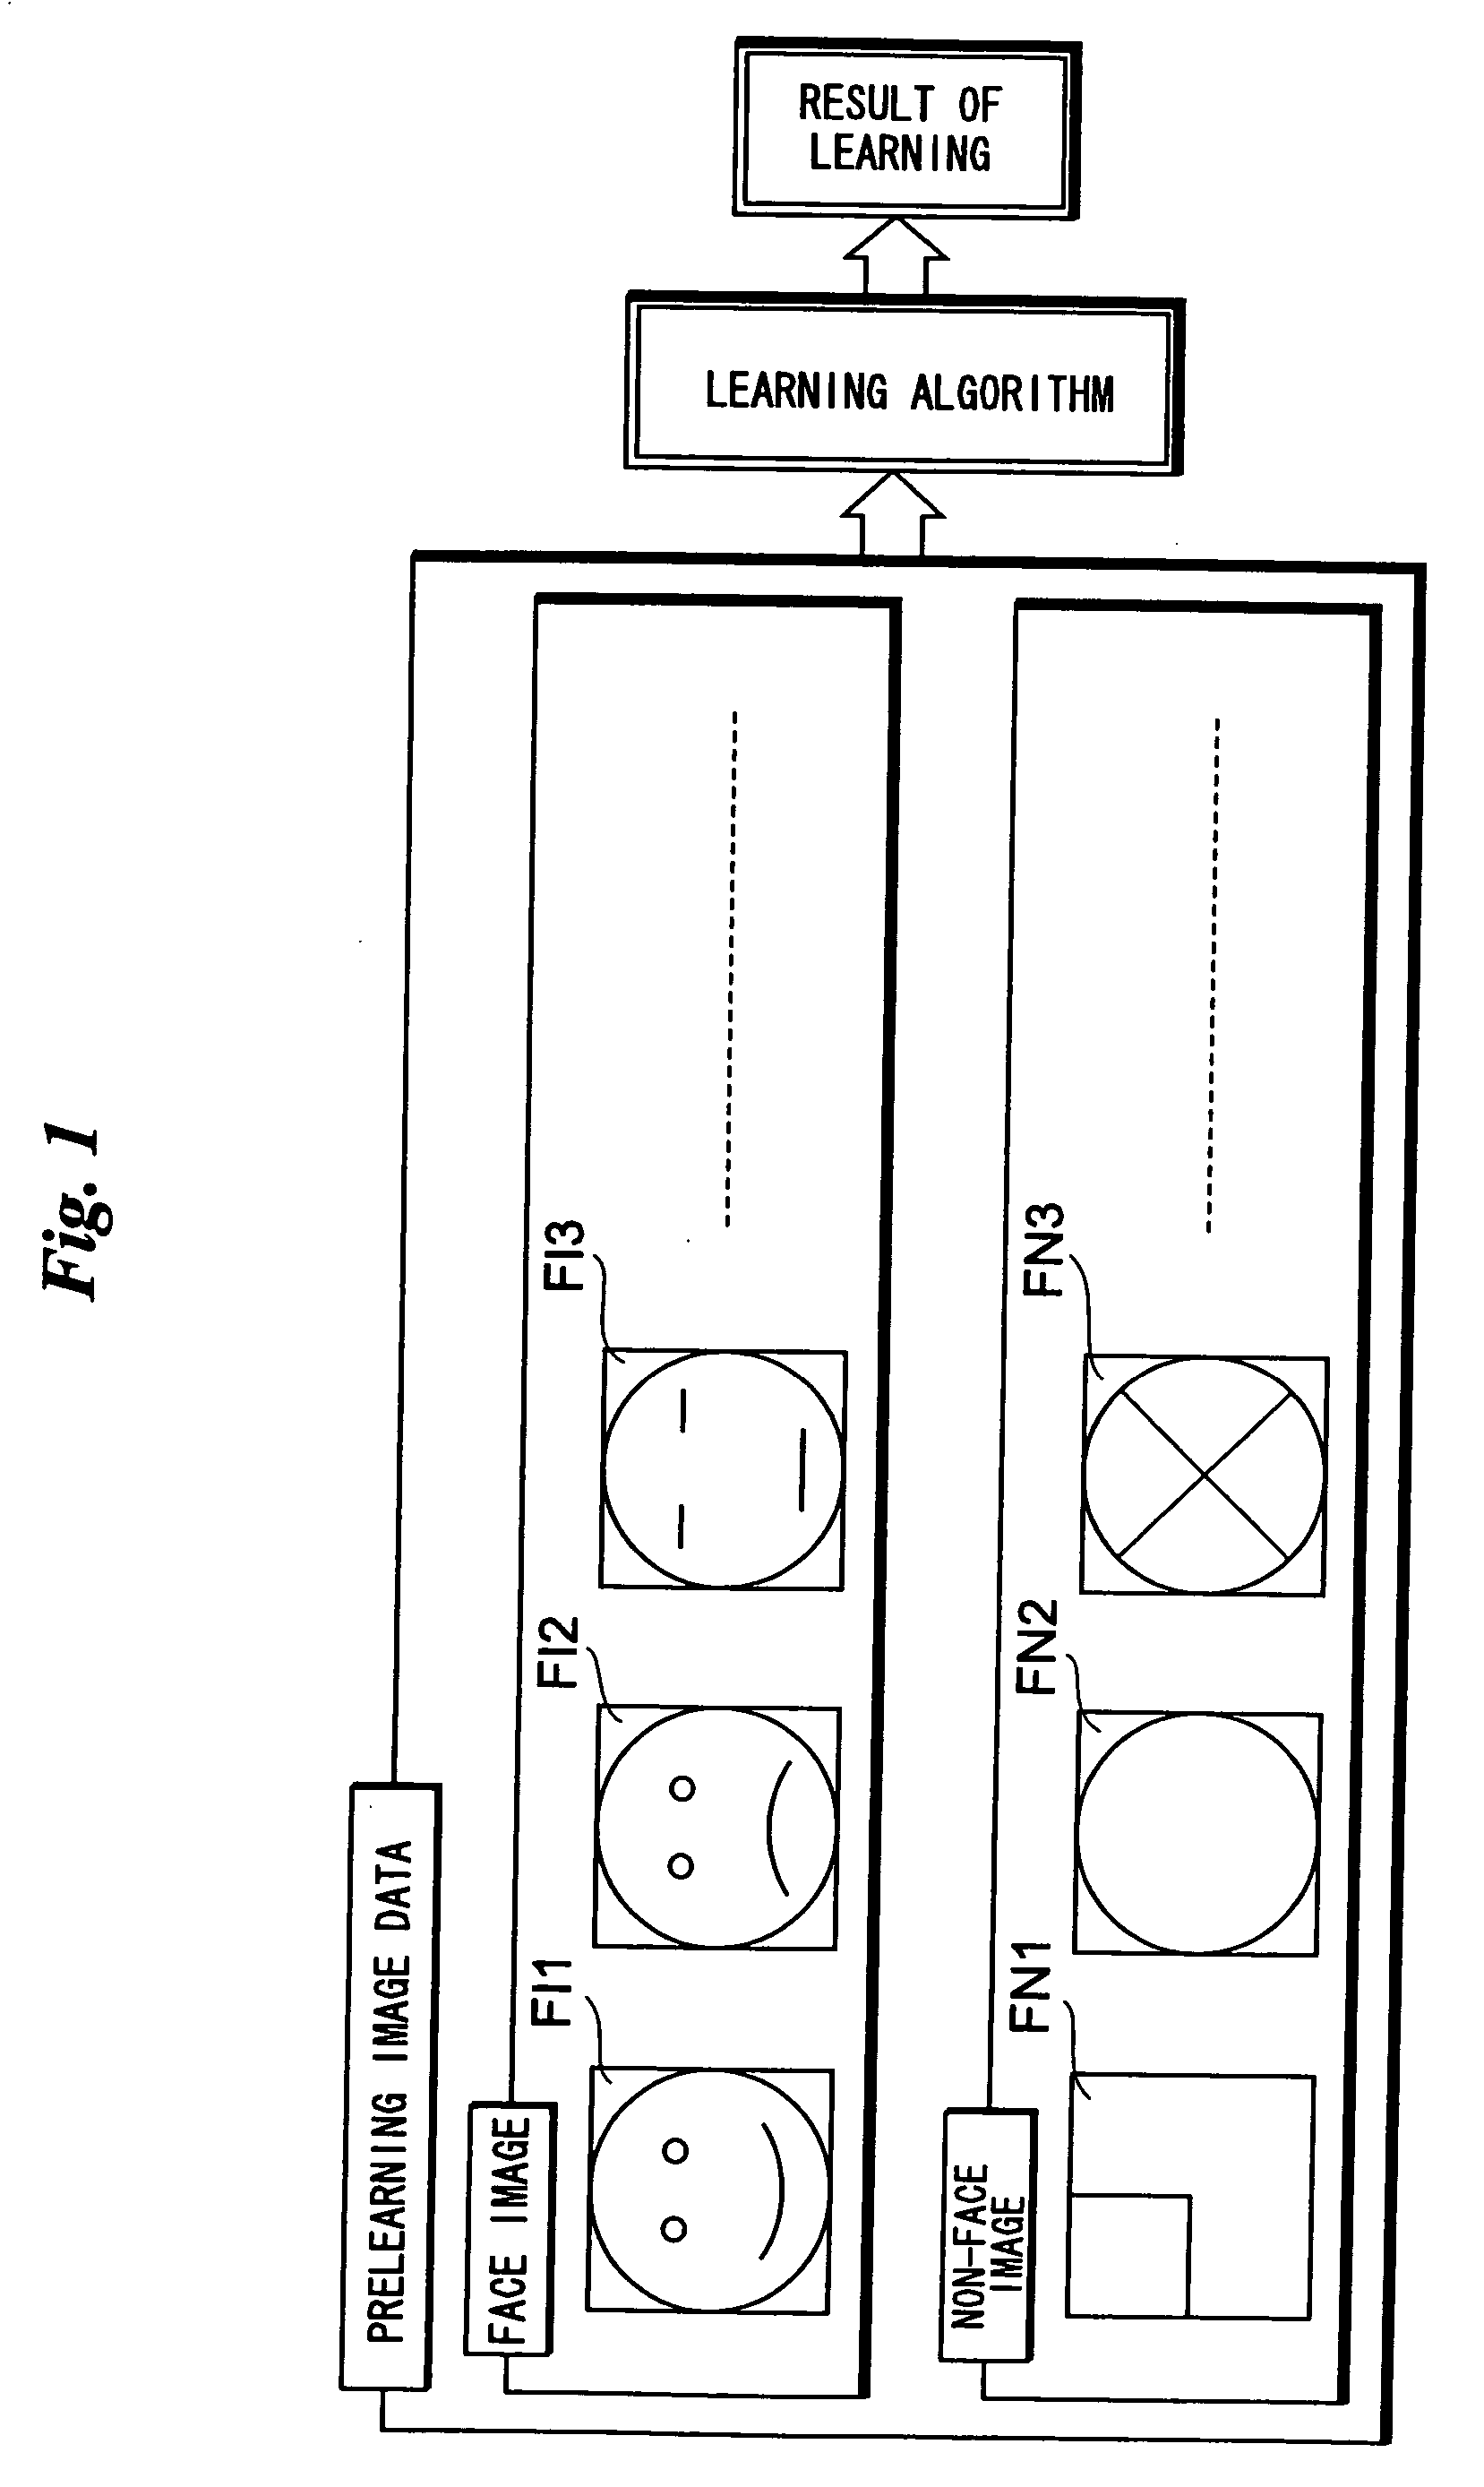 Image search apparatus for images to be detected, and method of controlling same